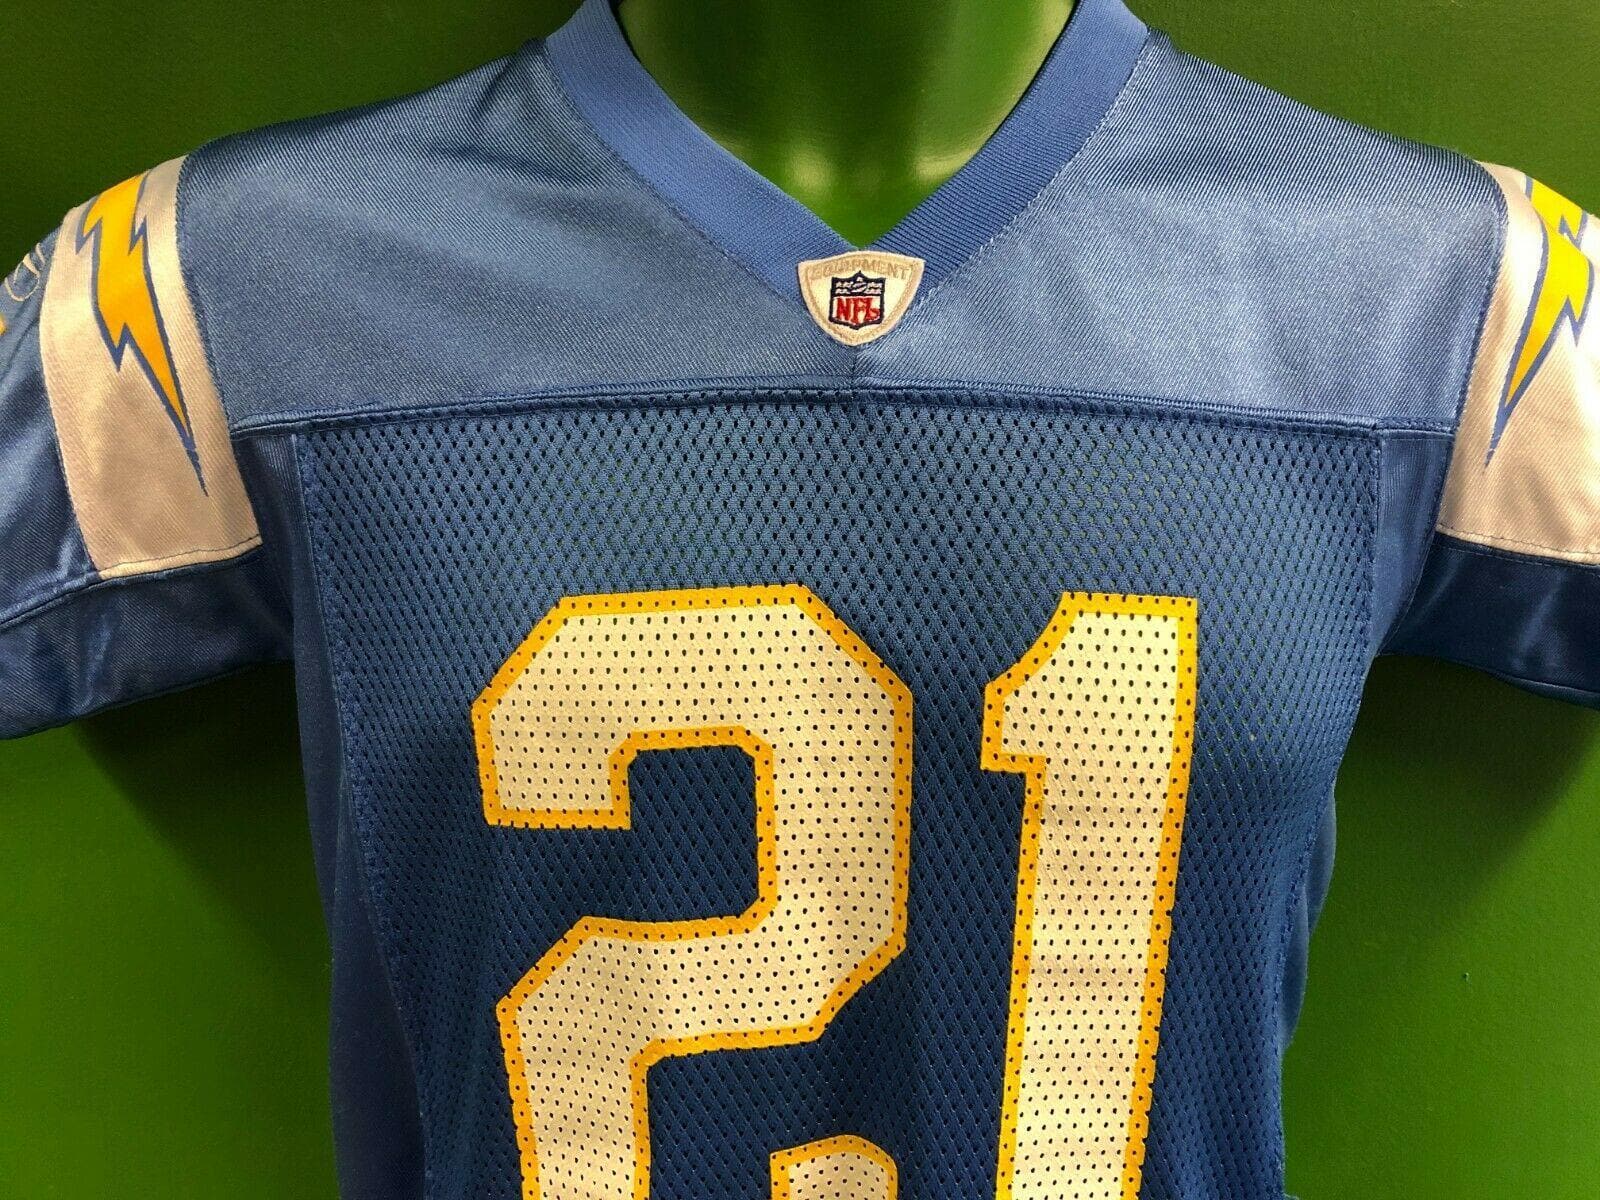 NFL Los Angeles Chargers Tomlinson #21 Reebok Jersey Youth Small 8